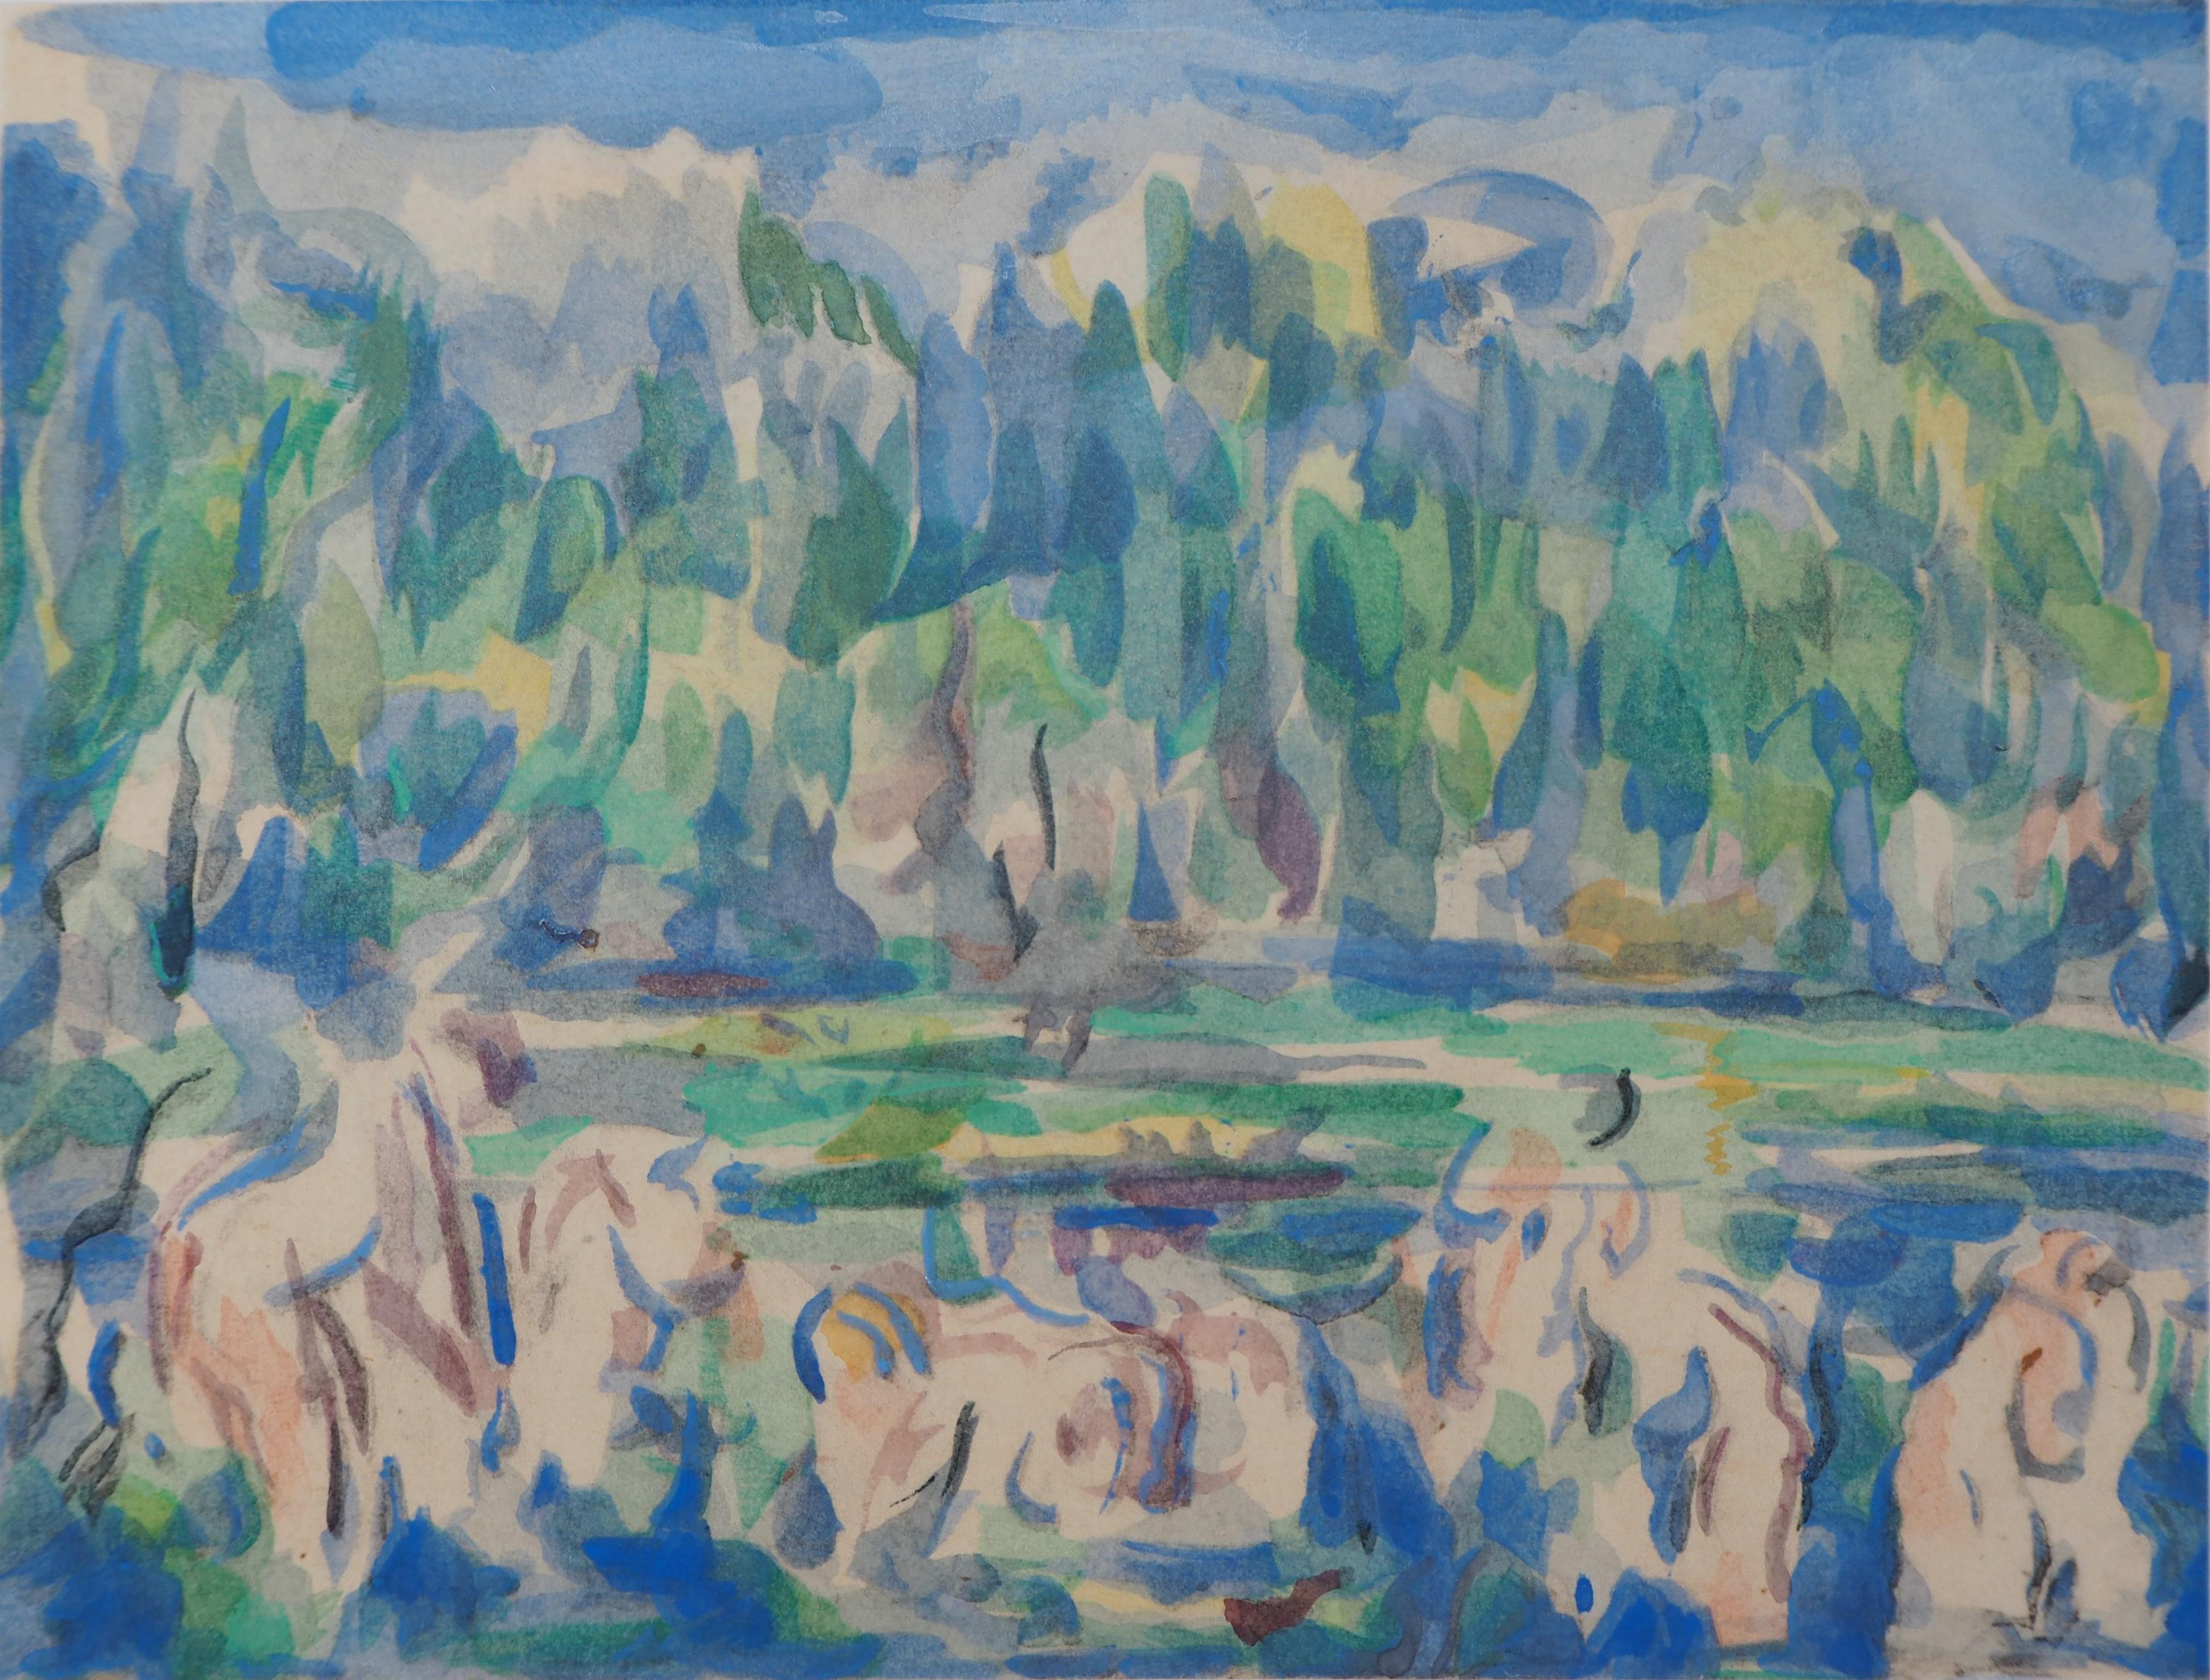 Bathers in a Lake - Lithograph and Stencil Watercolor, 1947